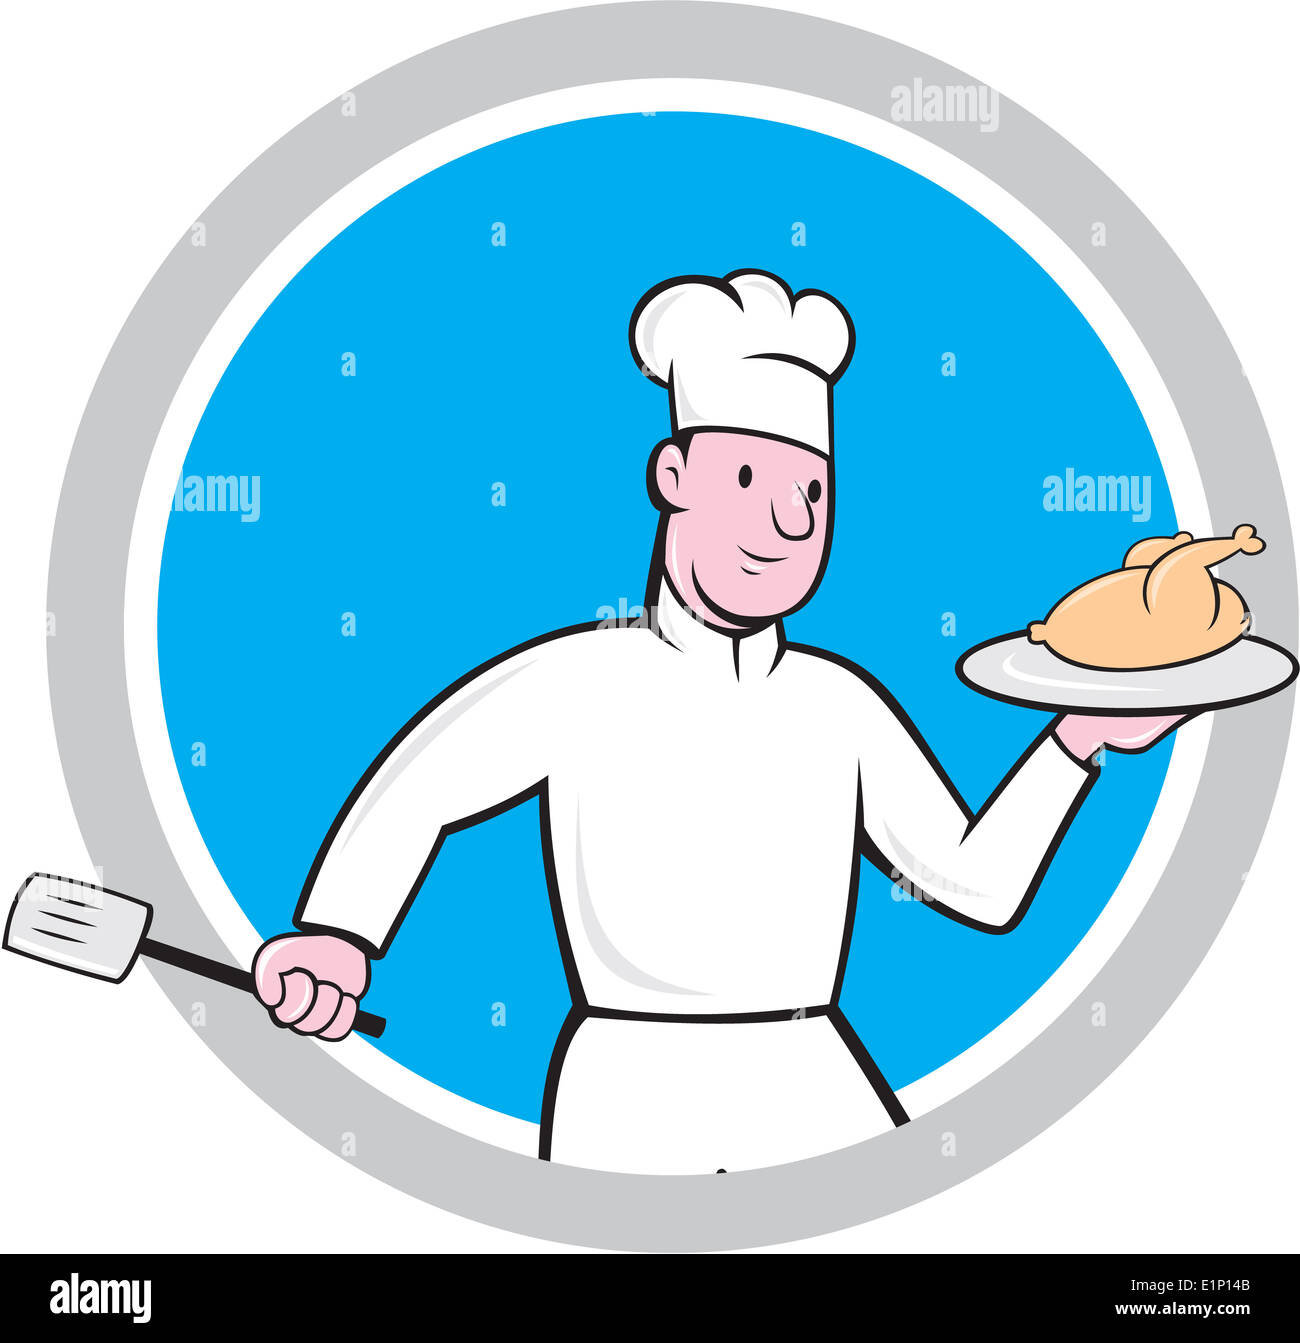 Illustration of a chef cook holding plate with chicken in one hand and spatula on other hand front view set inside circle on isolated background done in cartoon style. Stock Photo